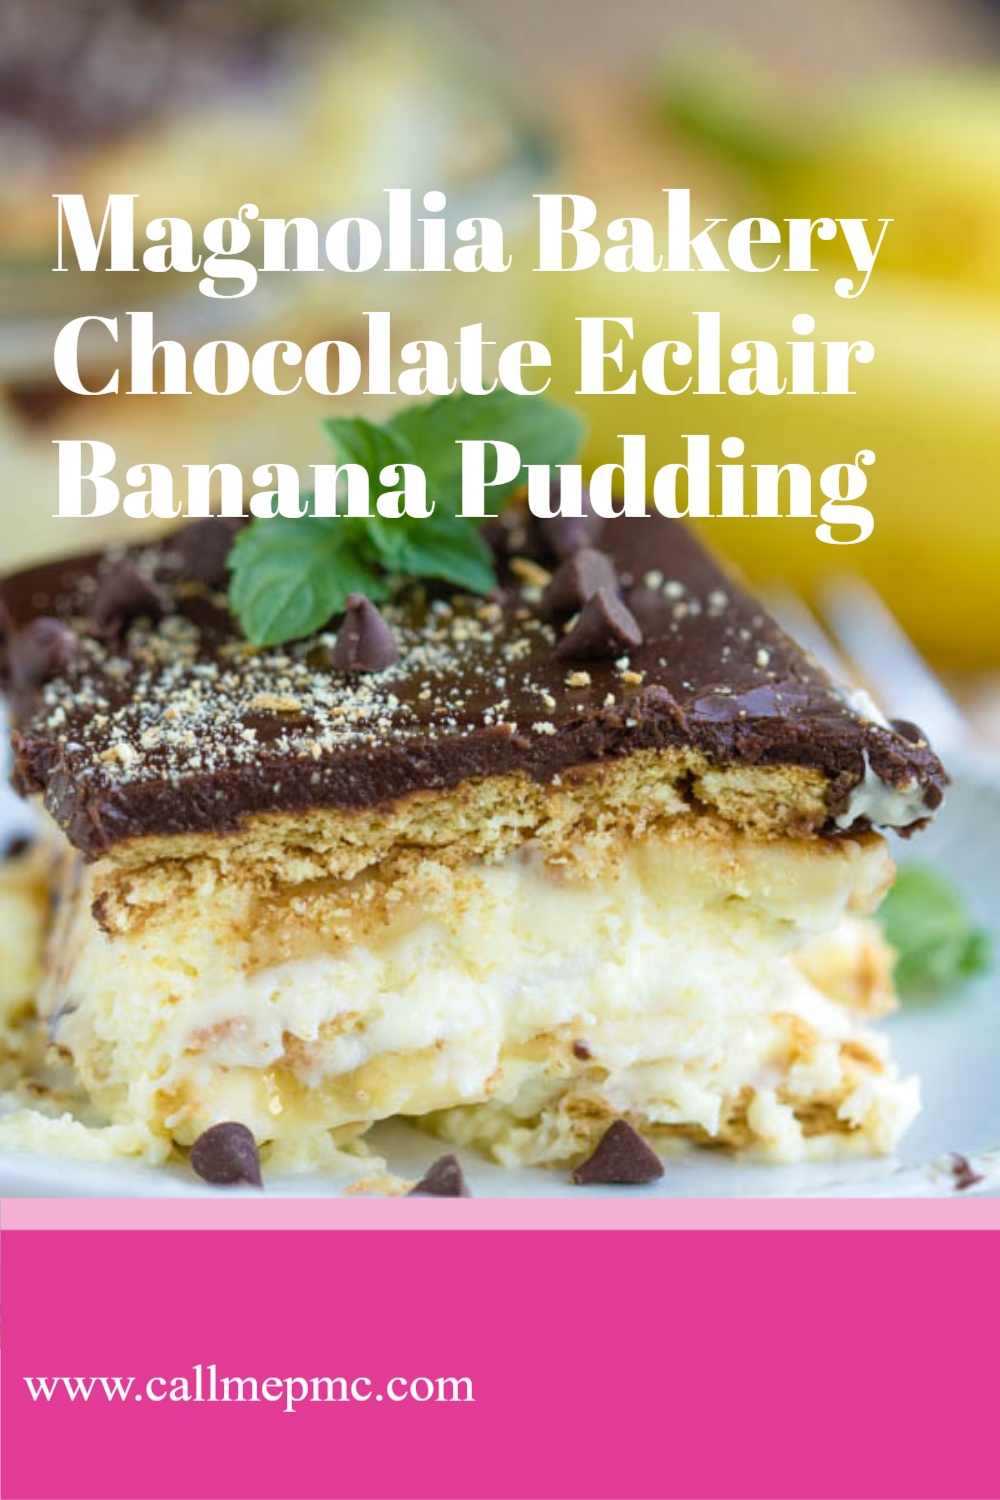 A no-bake dessert recipe, Magnolia Bakery Chocolate Eclair Banana Pudding, is an easy yet rich and decadent dessert. Multiple layers of yummy ingredients stack up to make one tasty treat.